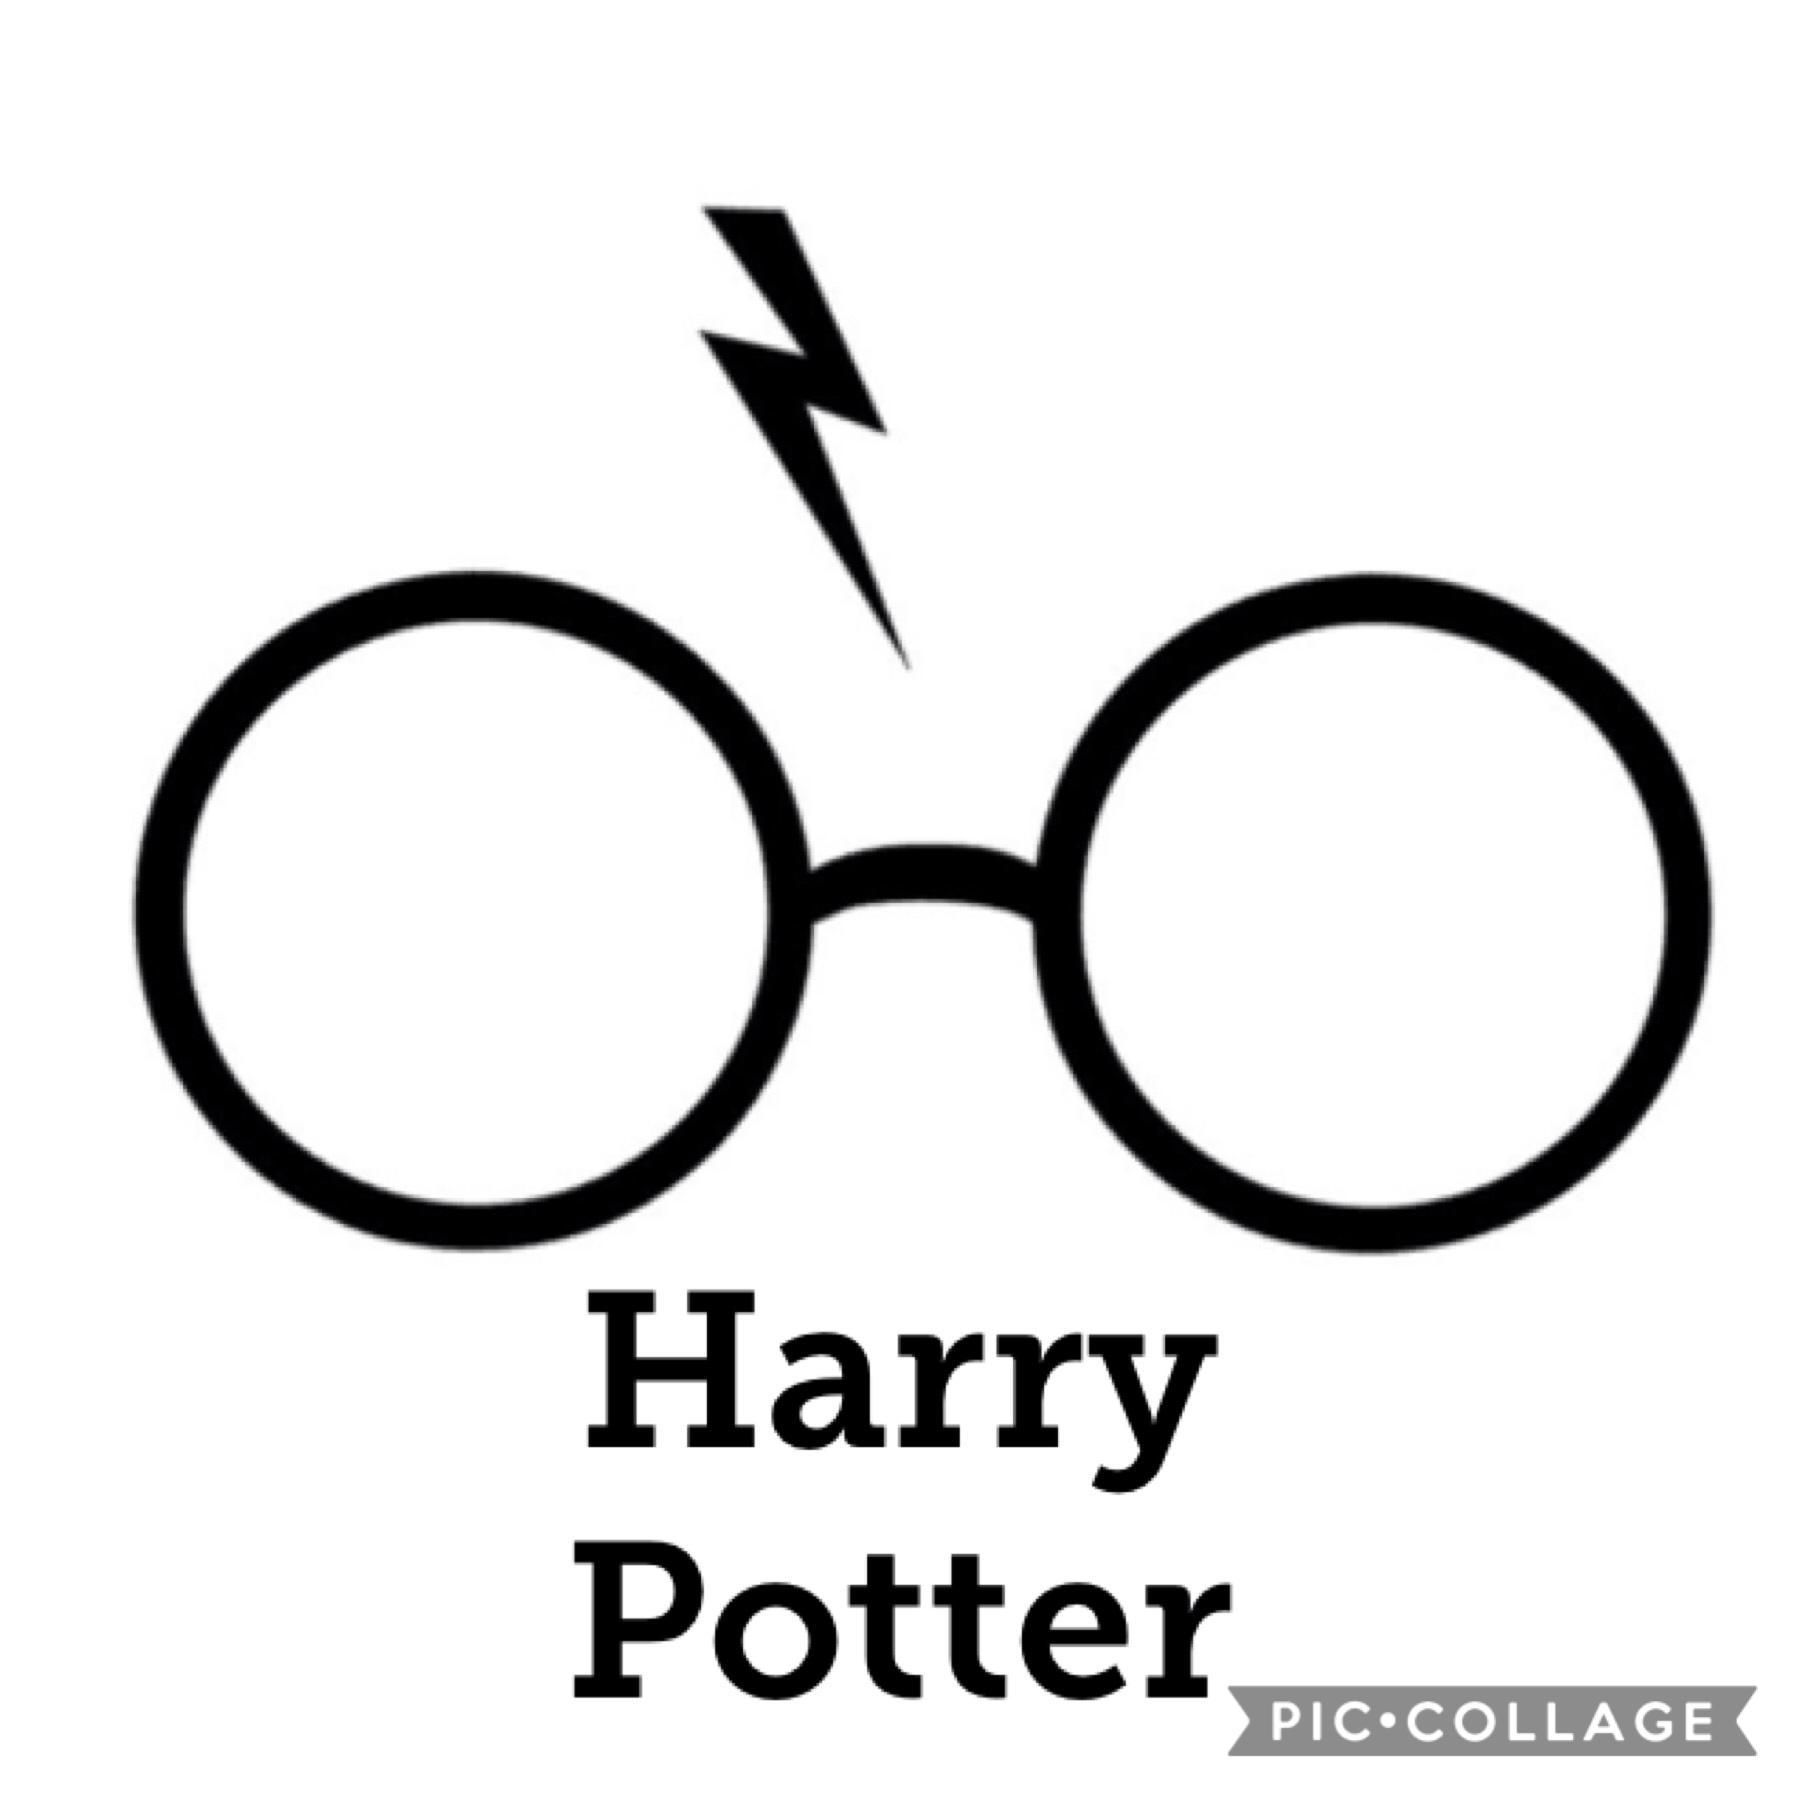 Hey everyone ! I would like to give a shoutout to all those Harry Potter fans !I personally love Harry Potter and if u haven't read any of the books you should. Sorry this is so simple but I'll make better ones
Please like and check out my other colleague